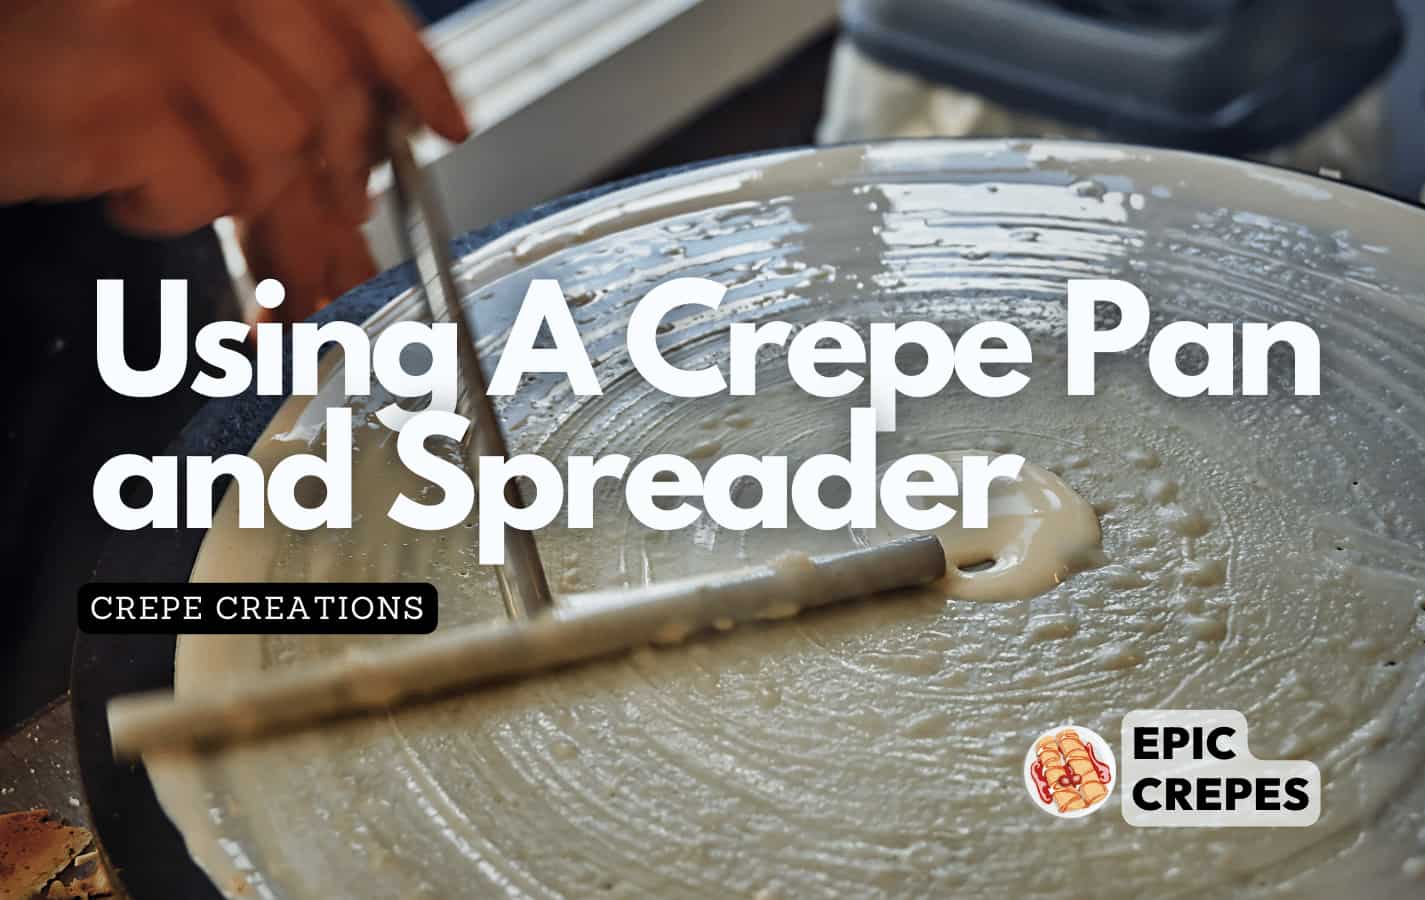 Using a crepe spreader